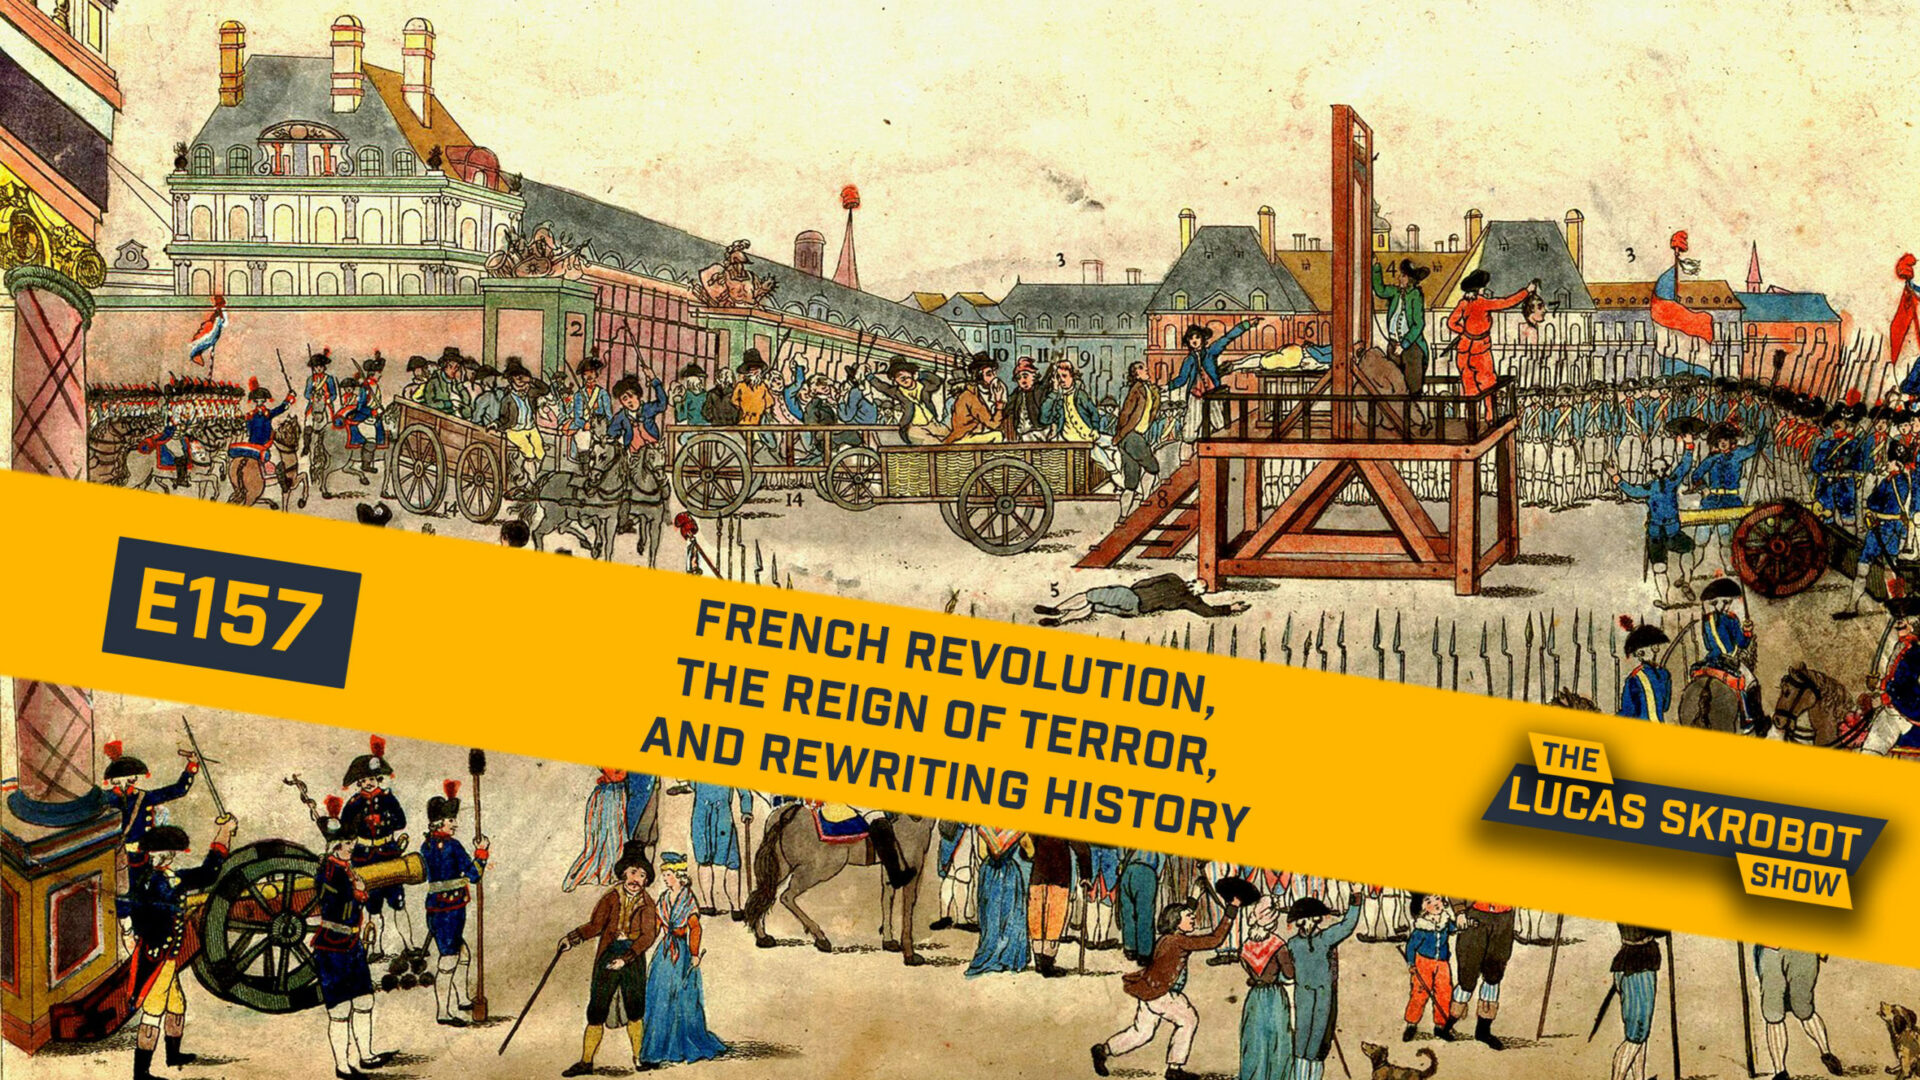 Reforming the Church | The French Revolution